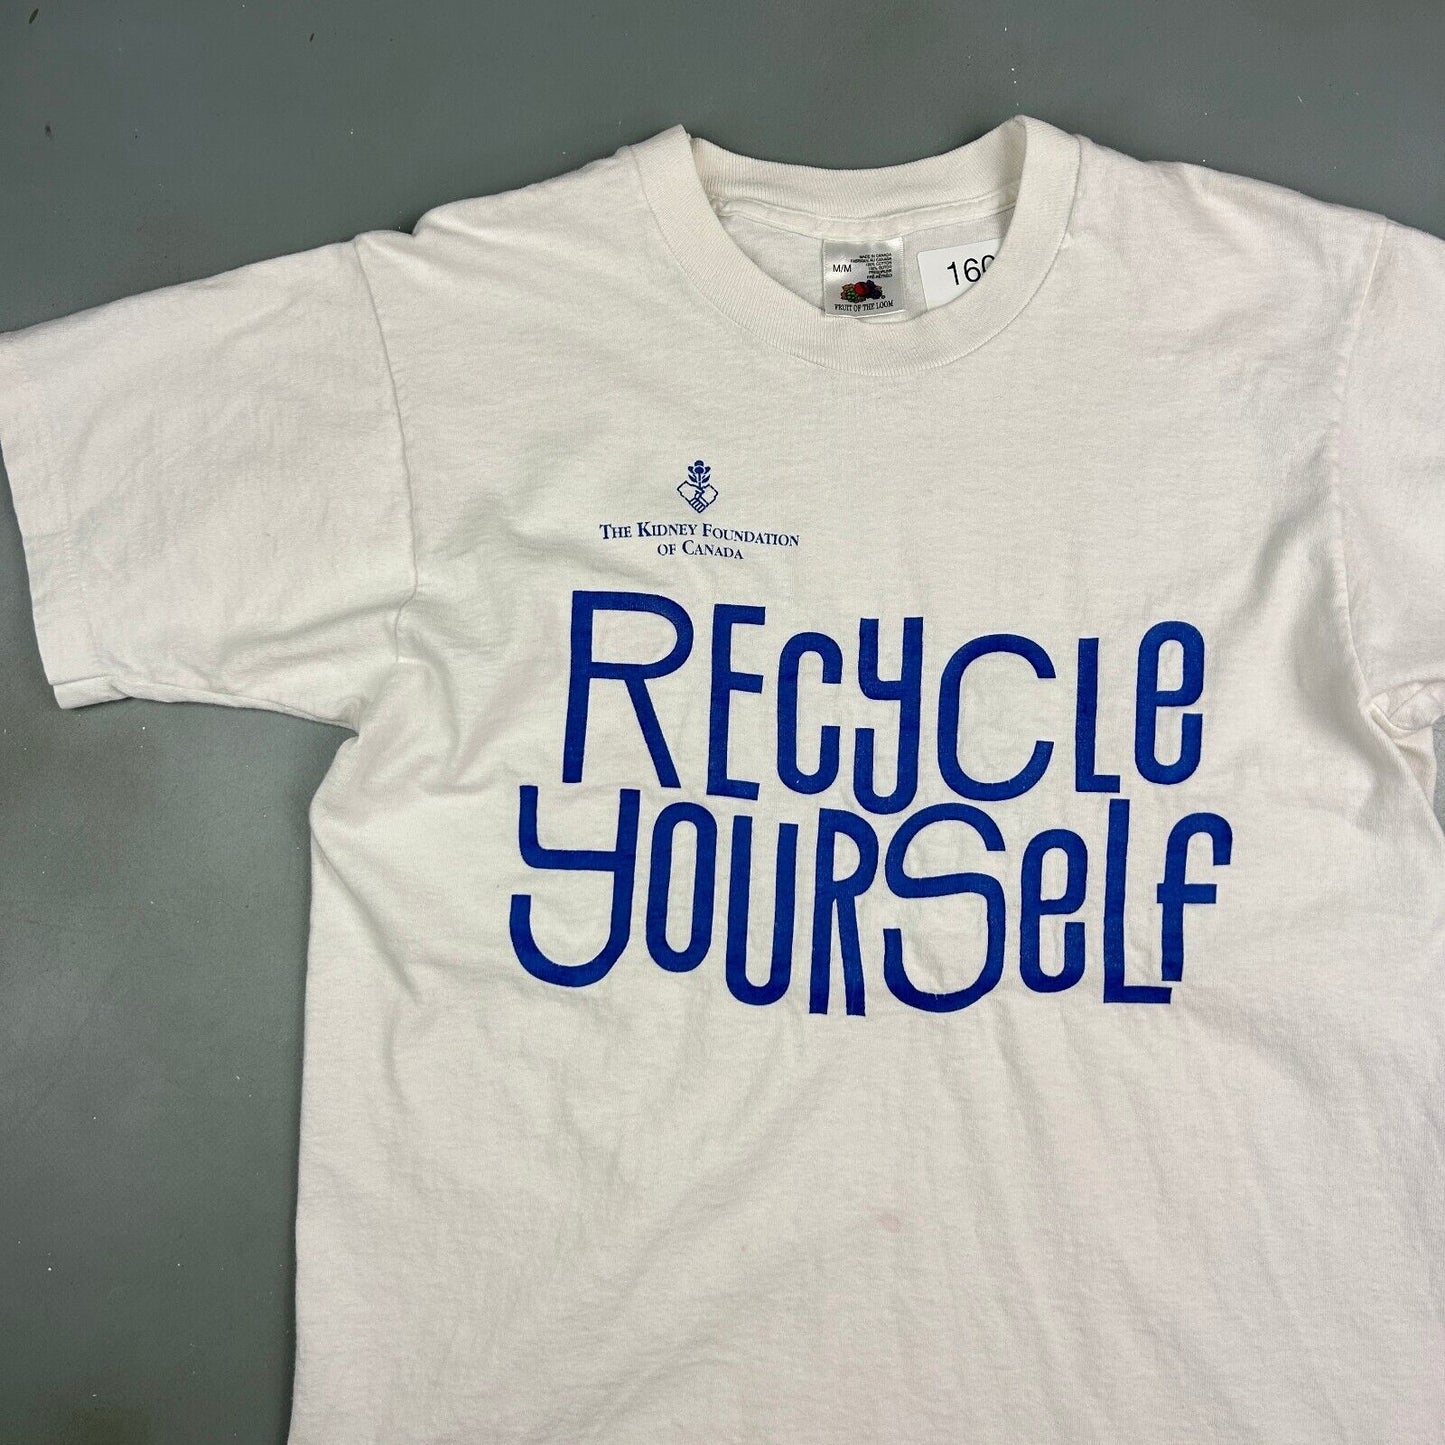 VINTAGE 90s | Recycle Yourself Kidney Foundation T-Shirt sz S-M Adult